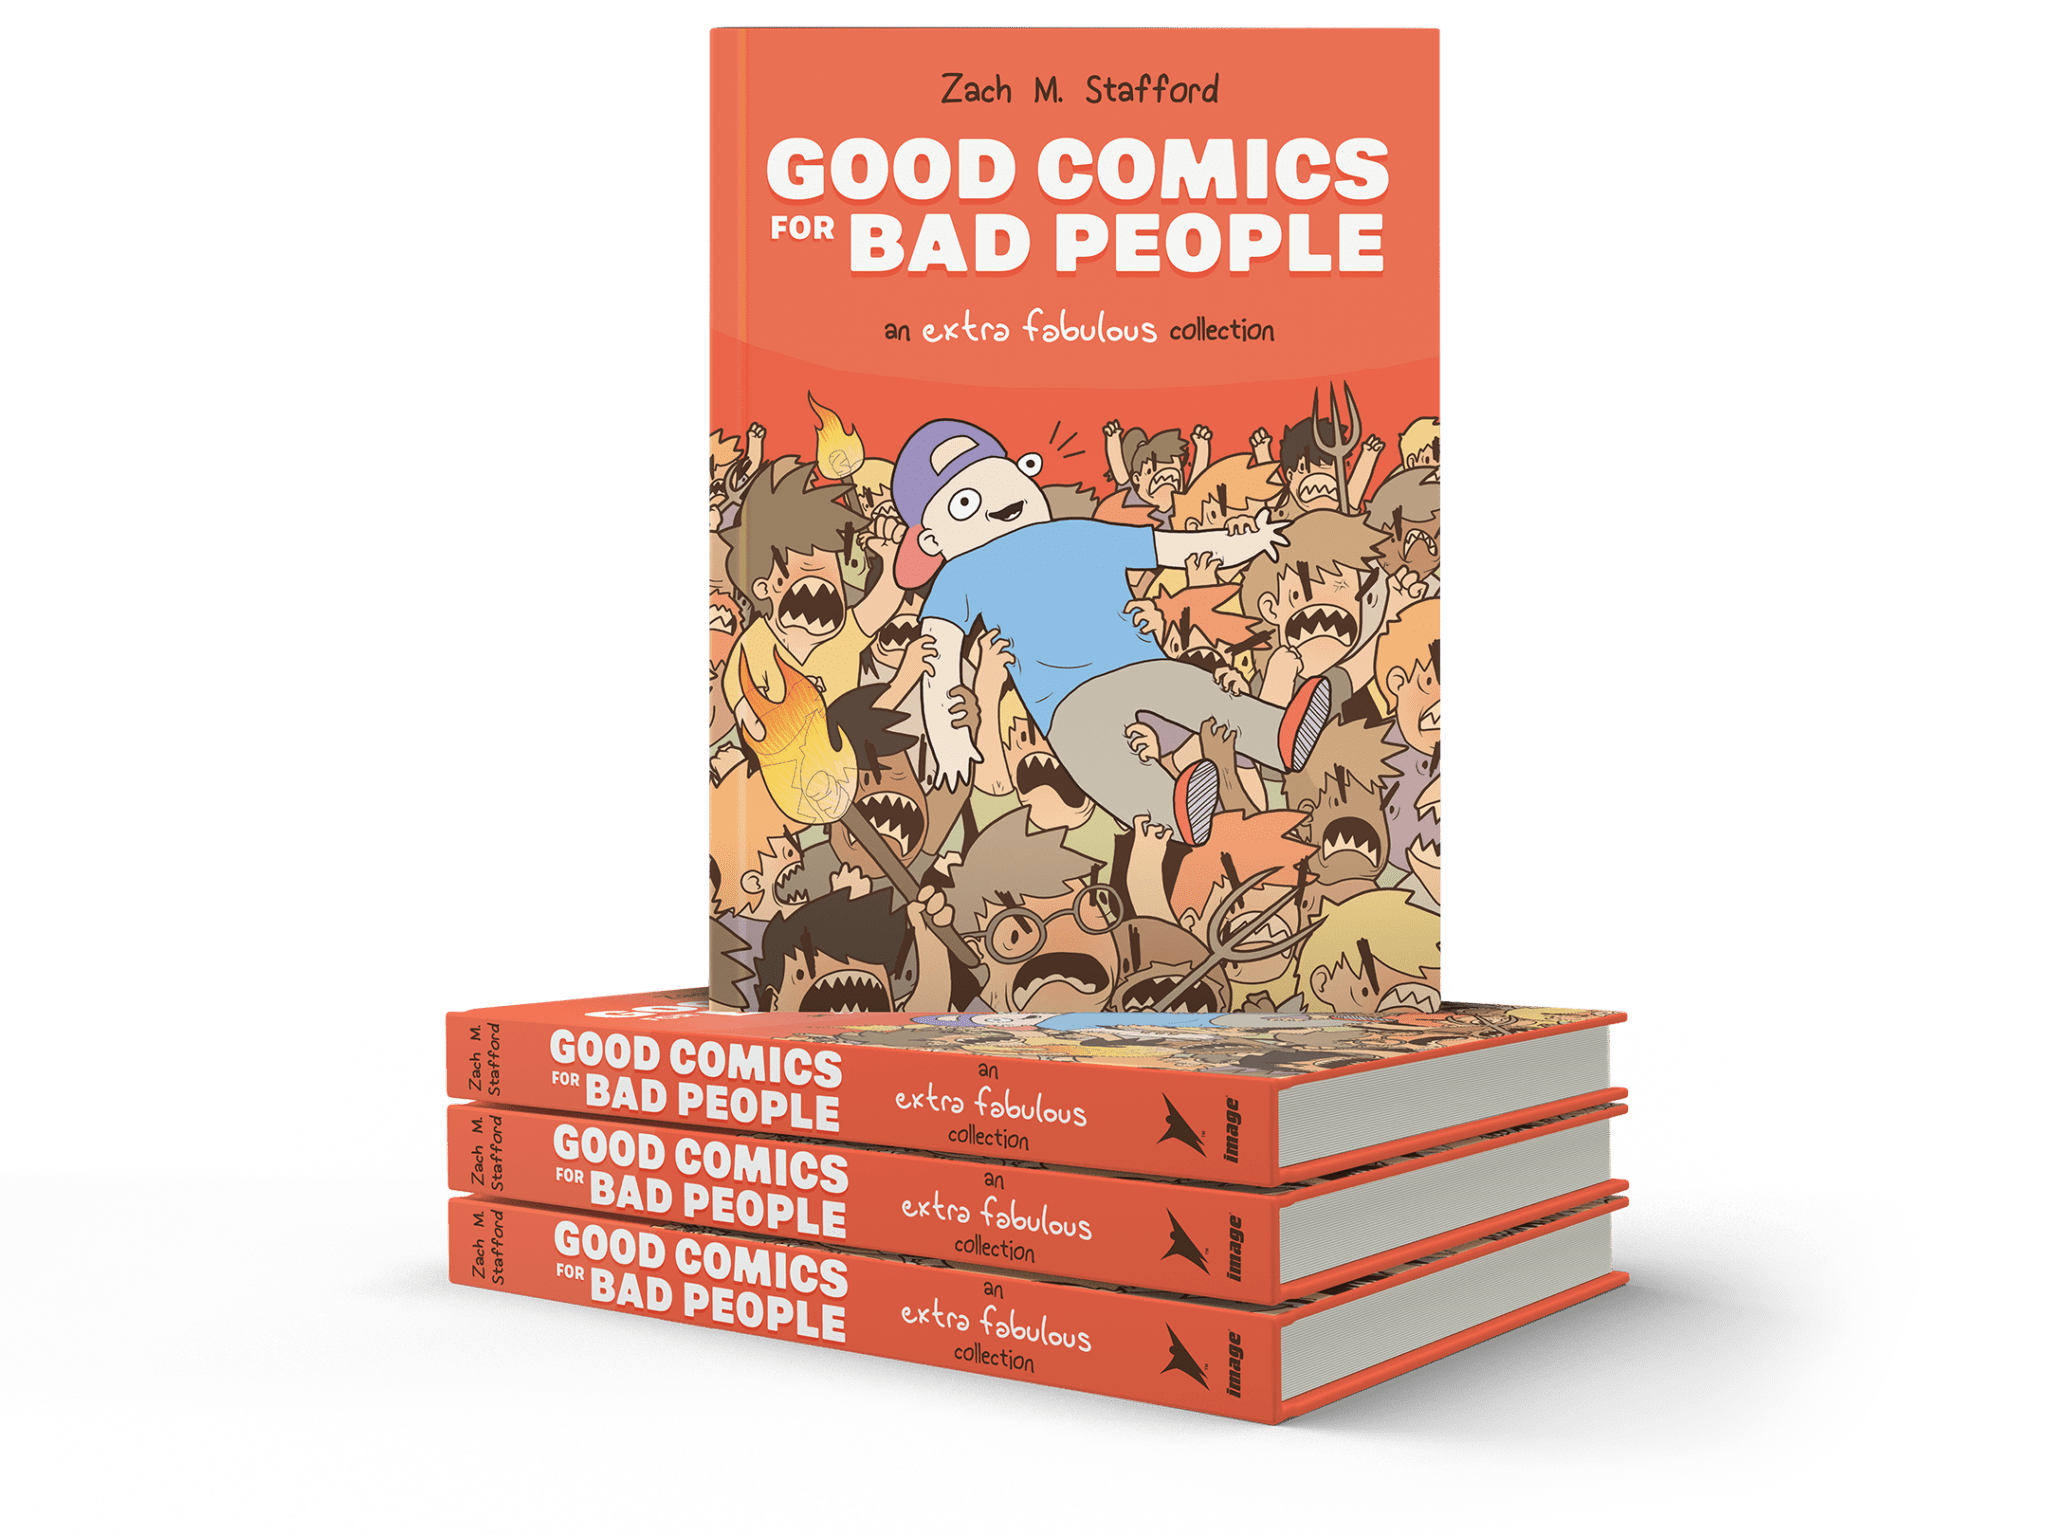 Good Comics for Bad People collection of Extra Fabulous comics